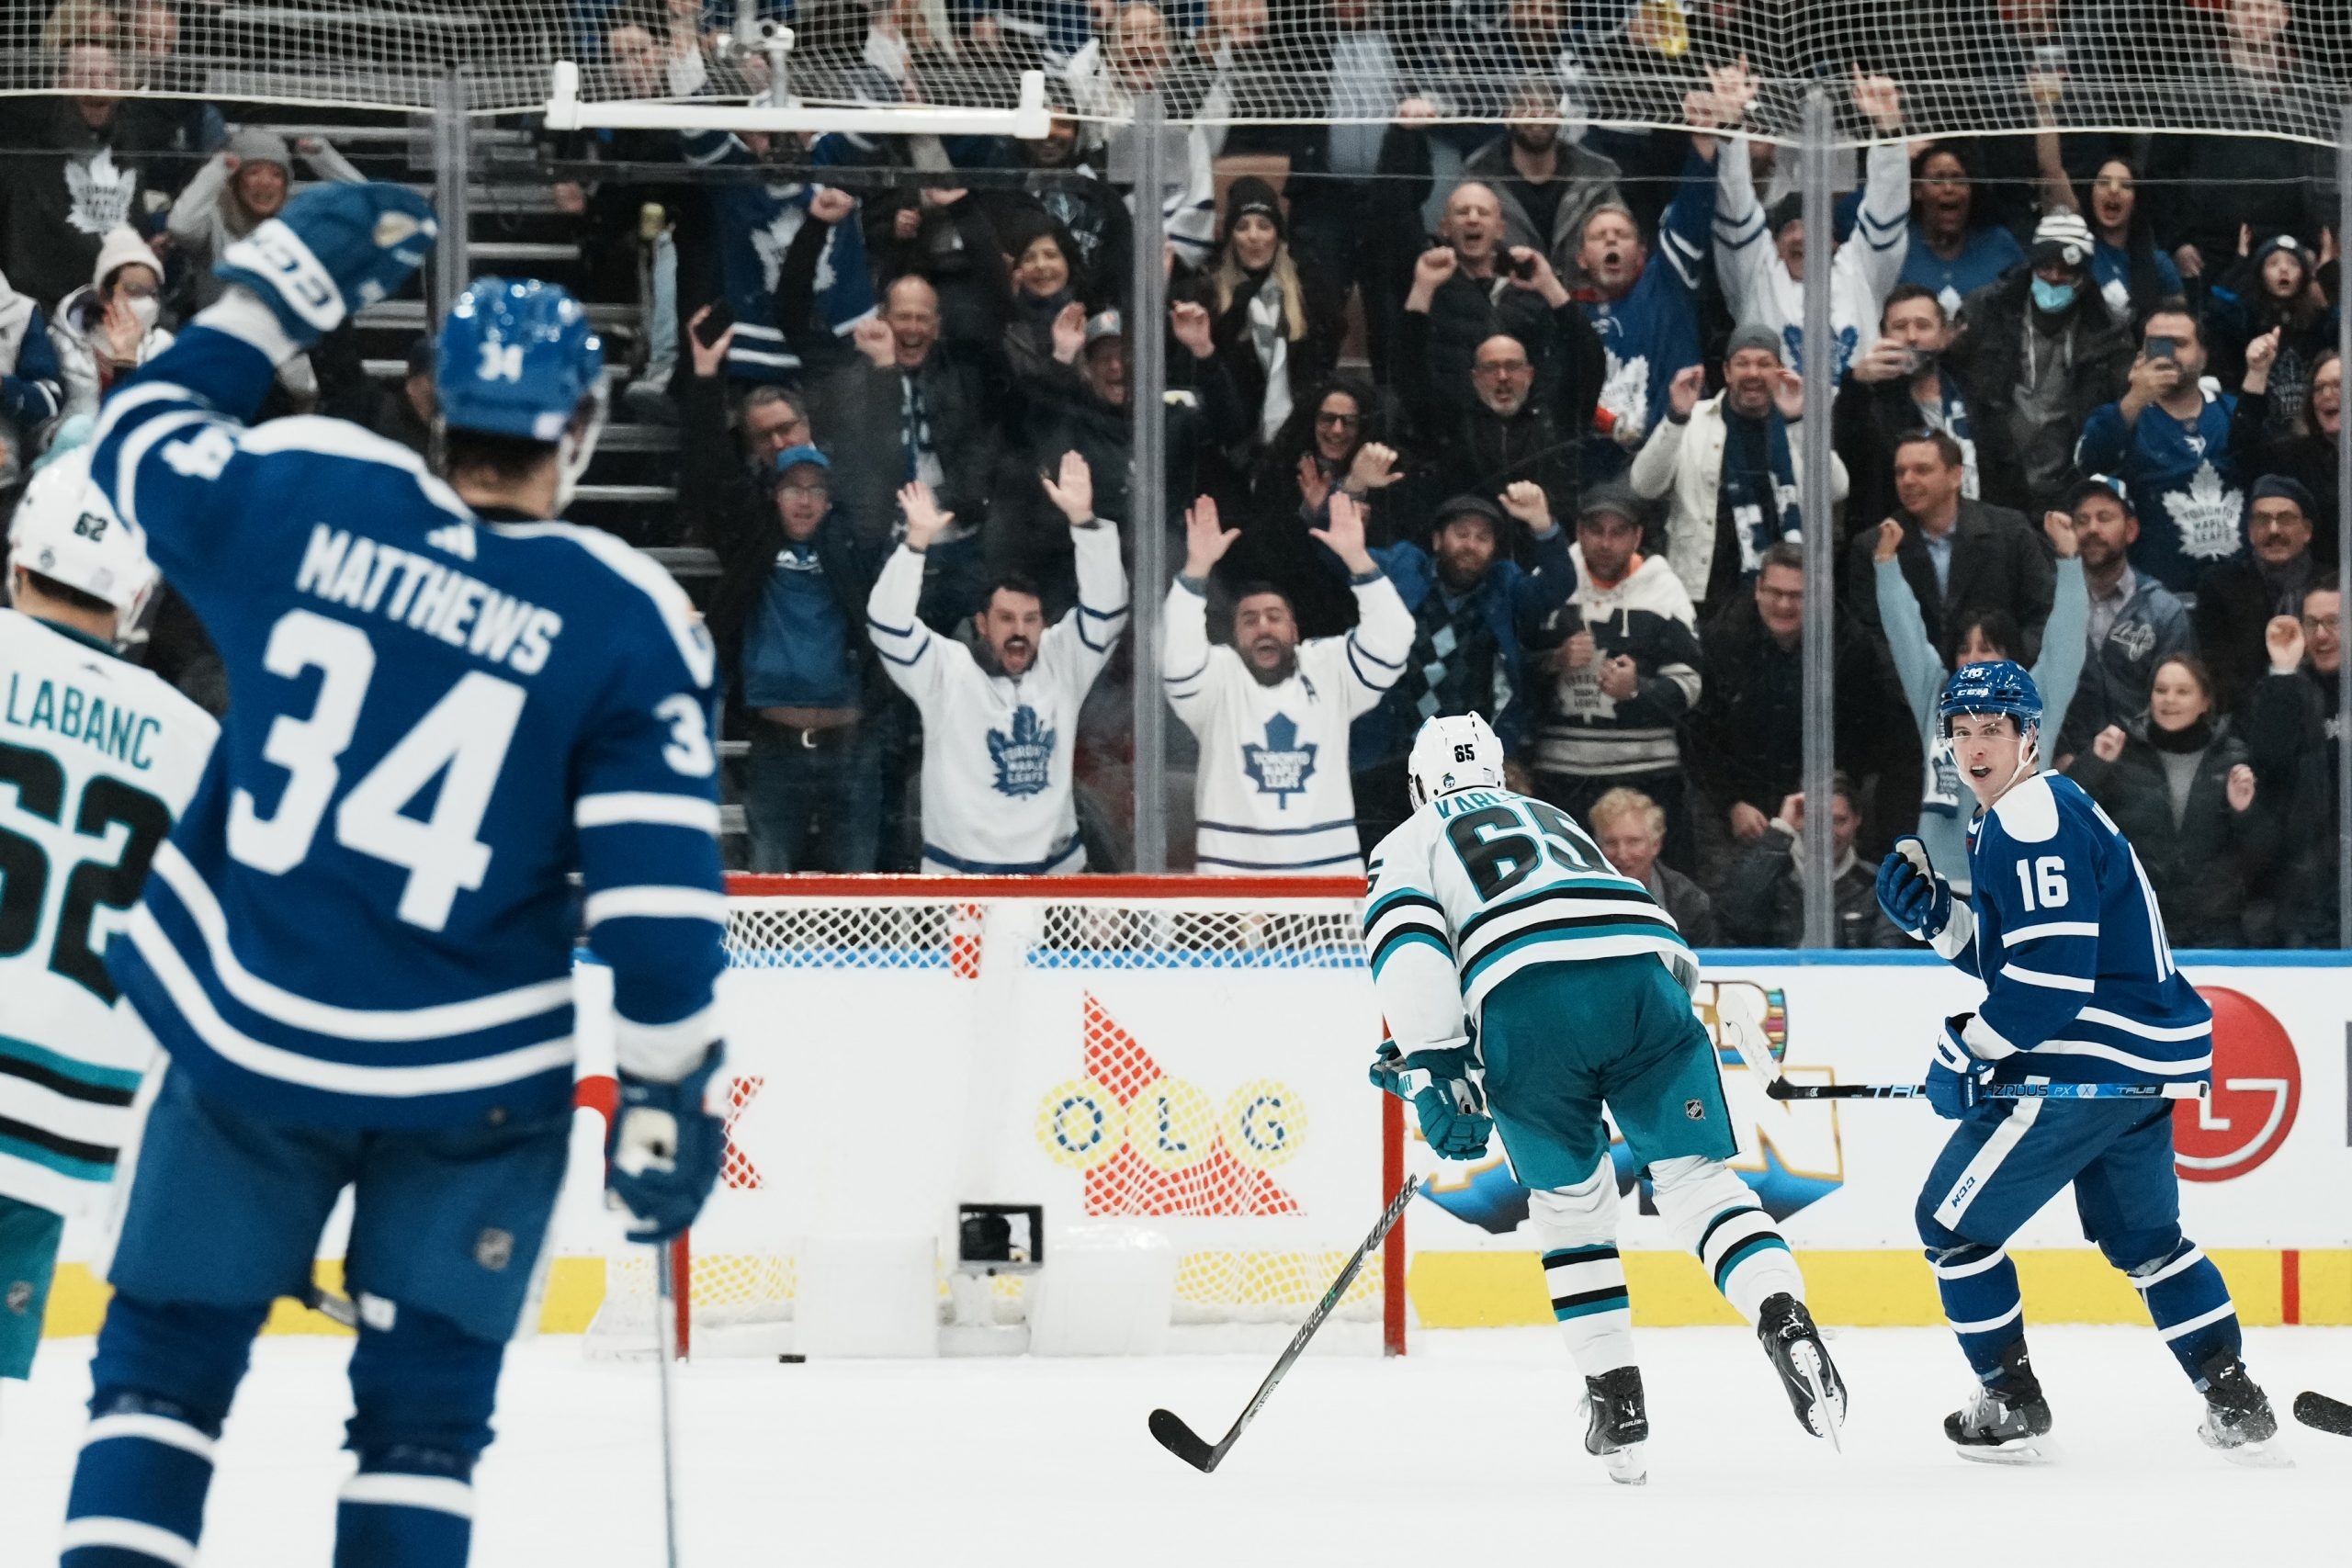 When Mitch Marner led the Maple Leafs to victory in one crazy minute